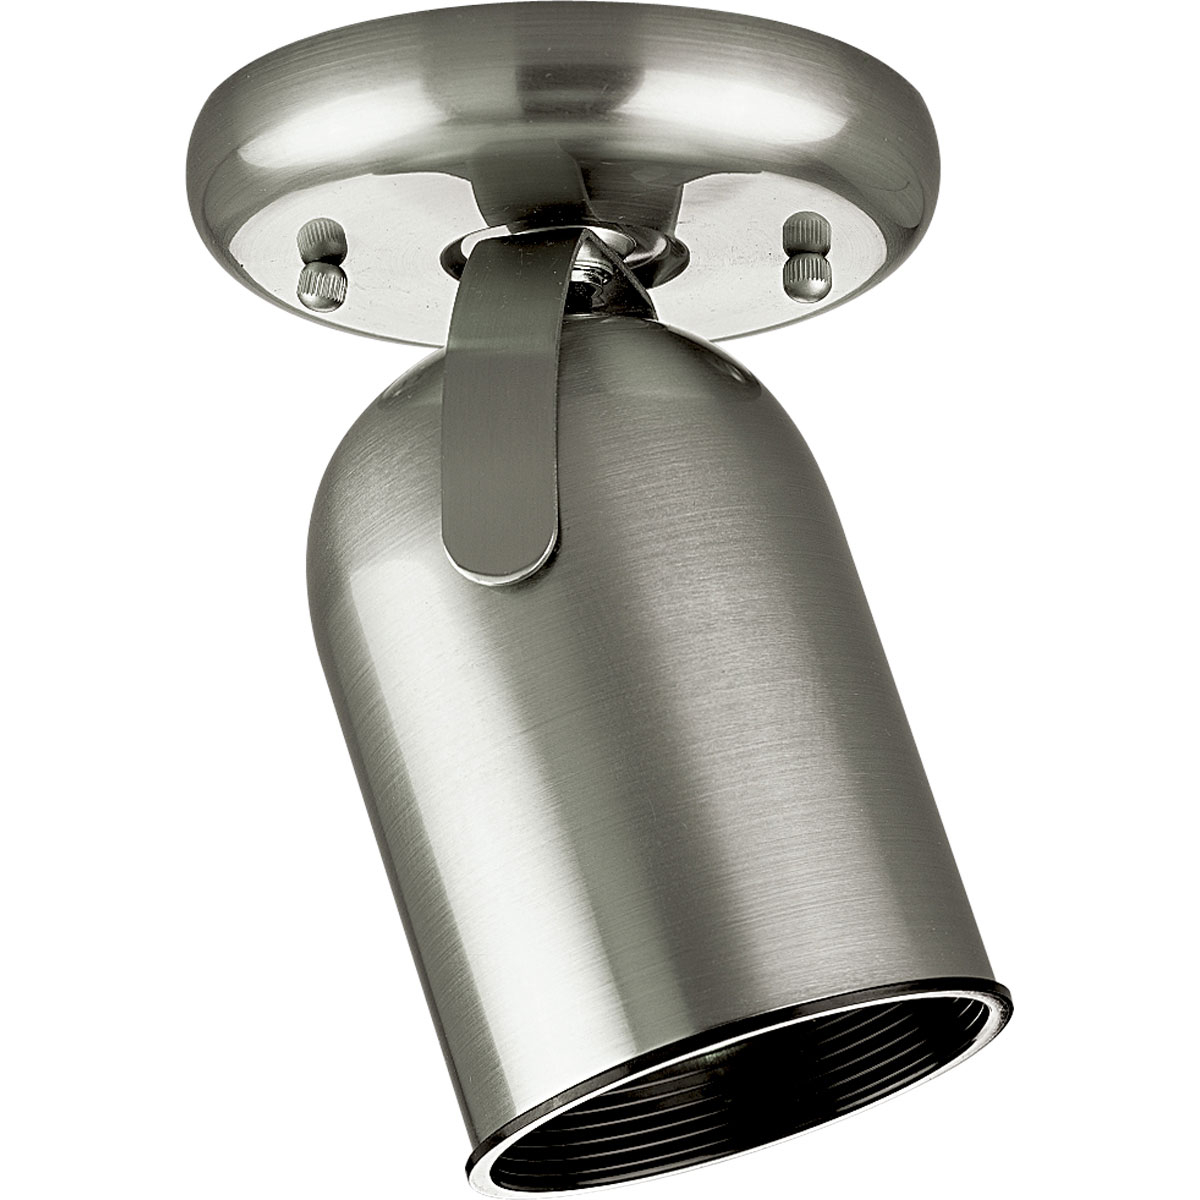 The contemporary design of this Progress Lighting one-light fixture updates the look of any room in your home. This multi-directional light comes in a clean, Brushed Nickel finish that complements almost any style. One-light round back ceiling mount directional in Brushed Nickel finish.